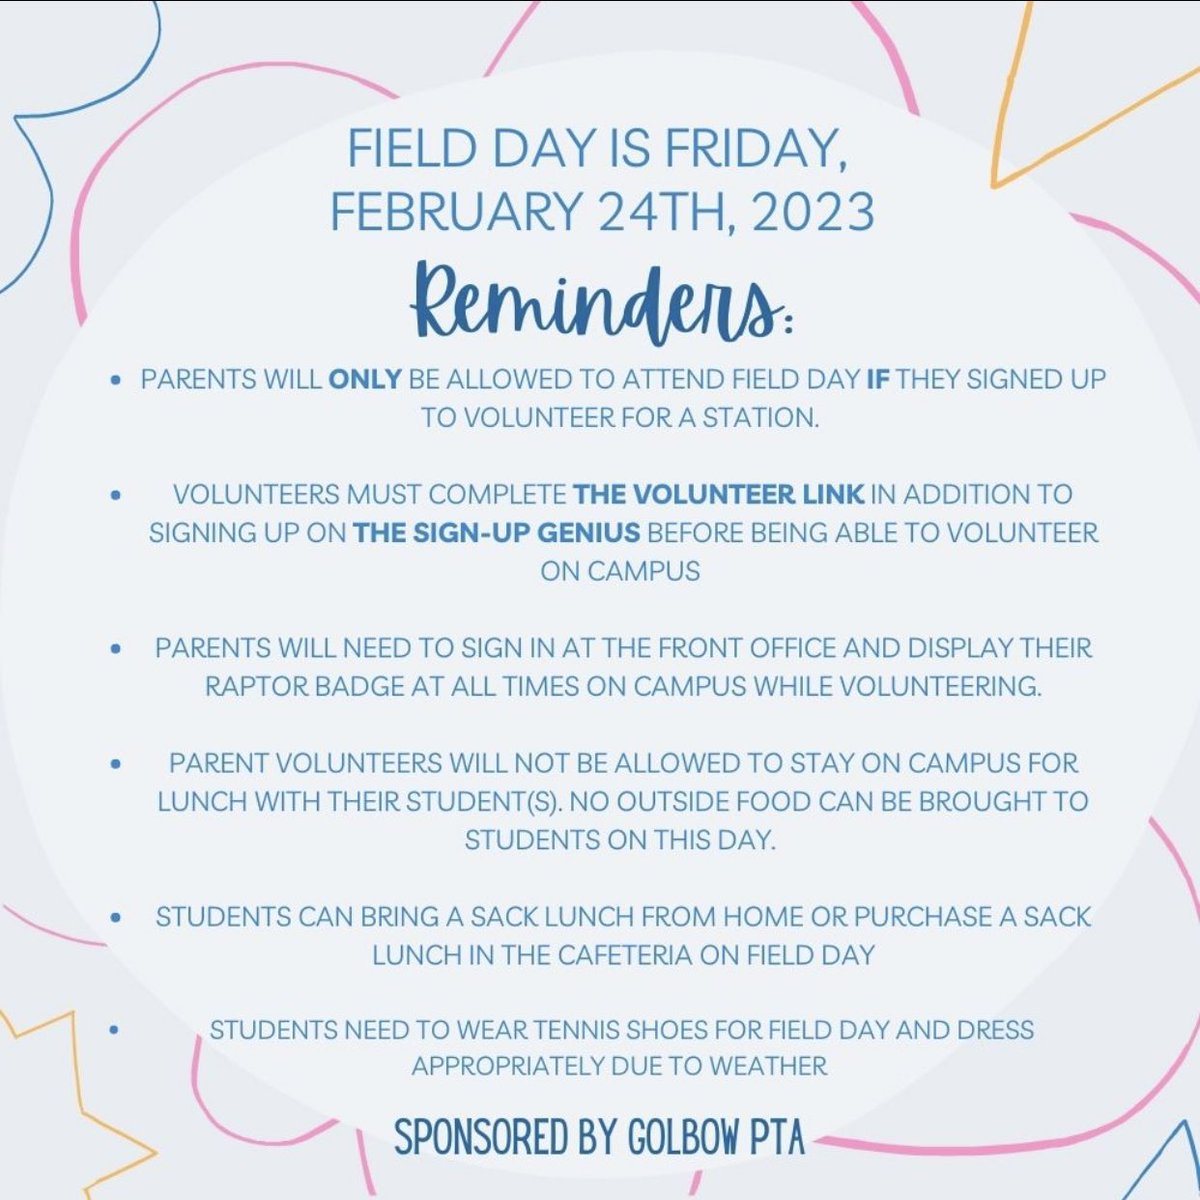 Field Day is coming!! Sign up now to volunteer to run a station!!! #GEPE #GEPTA #GEFieldDay signupgenius.com/go/904044DACA7…